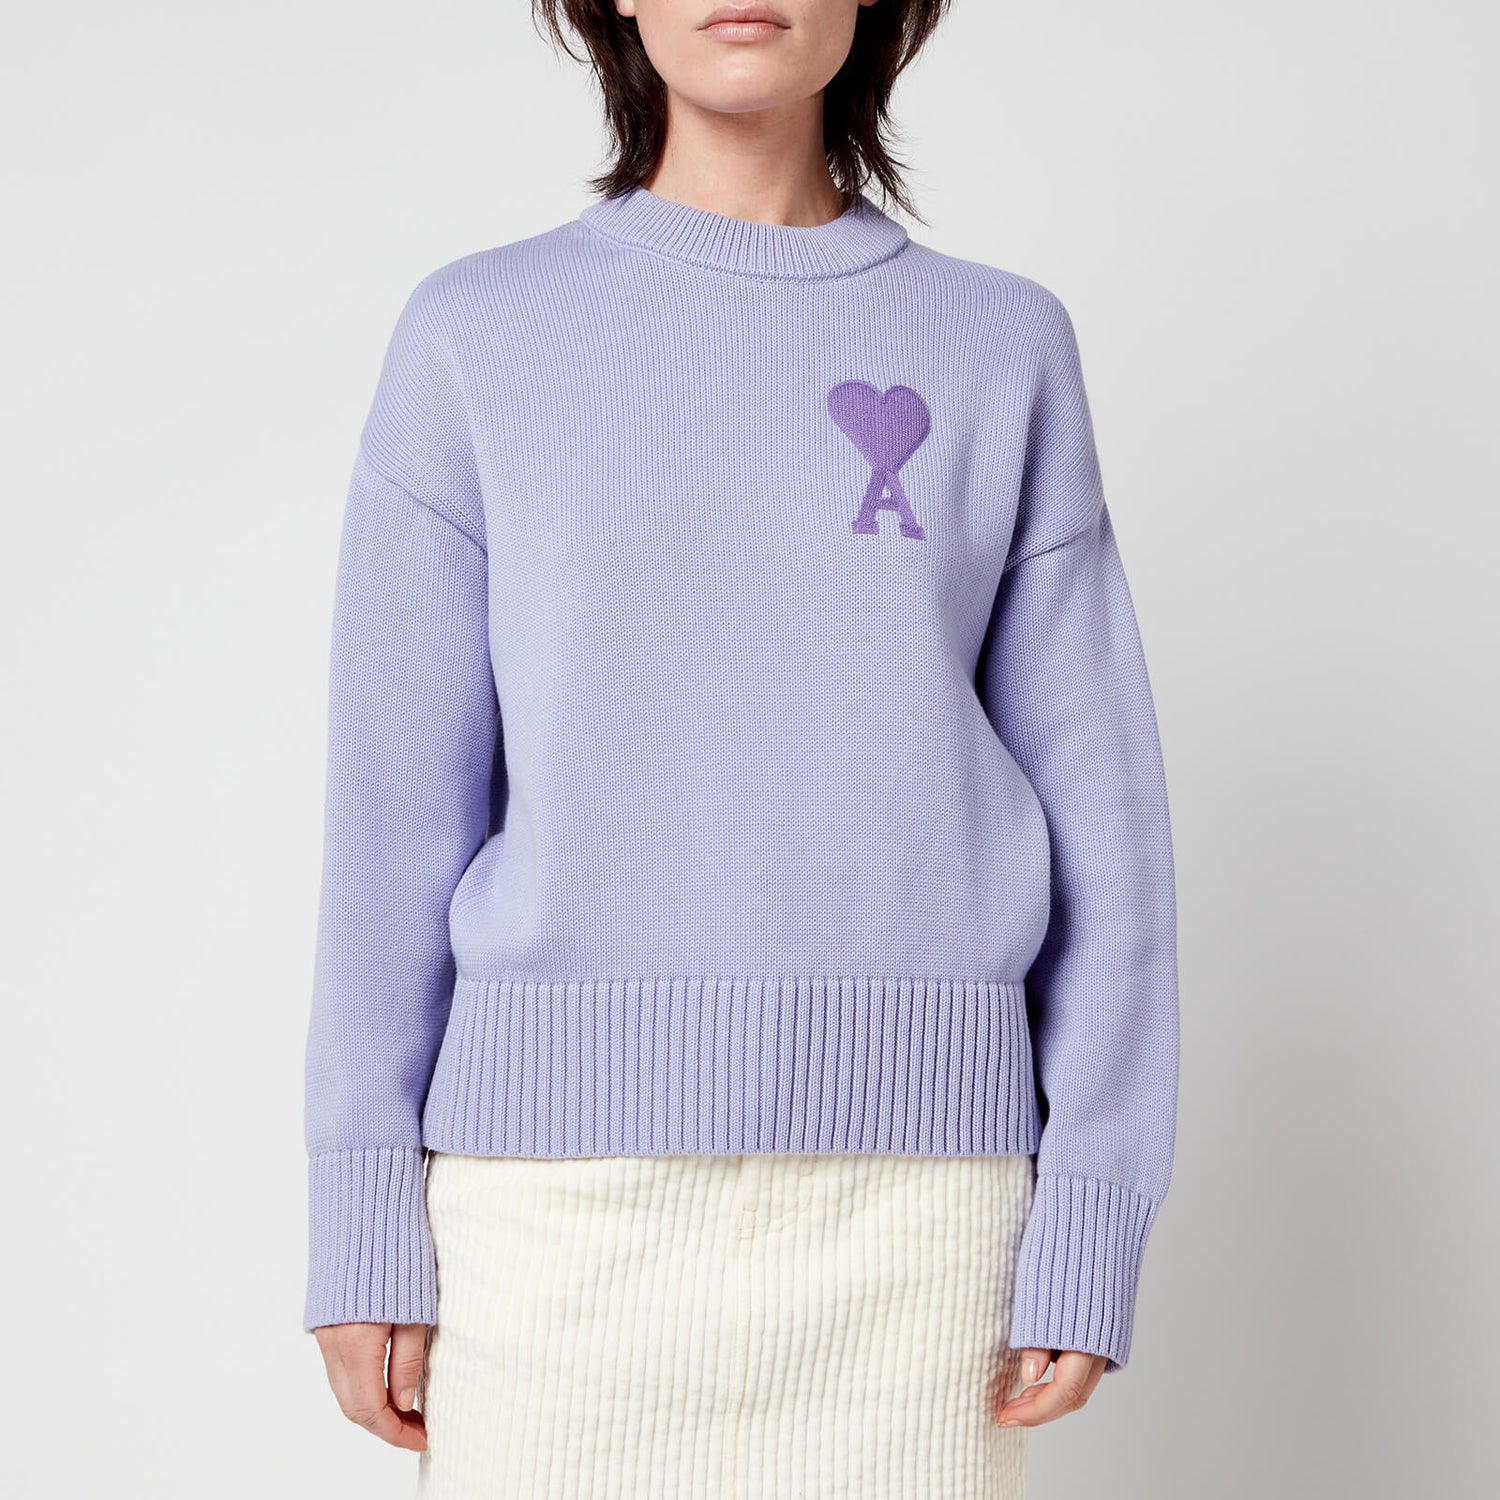 AMI Women's De Coeur Jumper - Lilac - Free UK Delivery Available